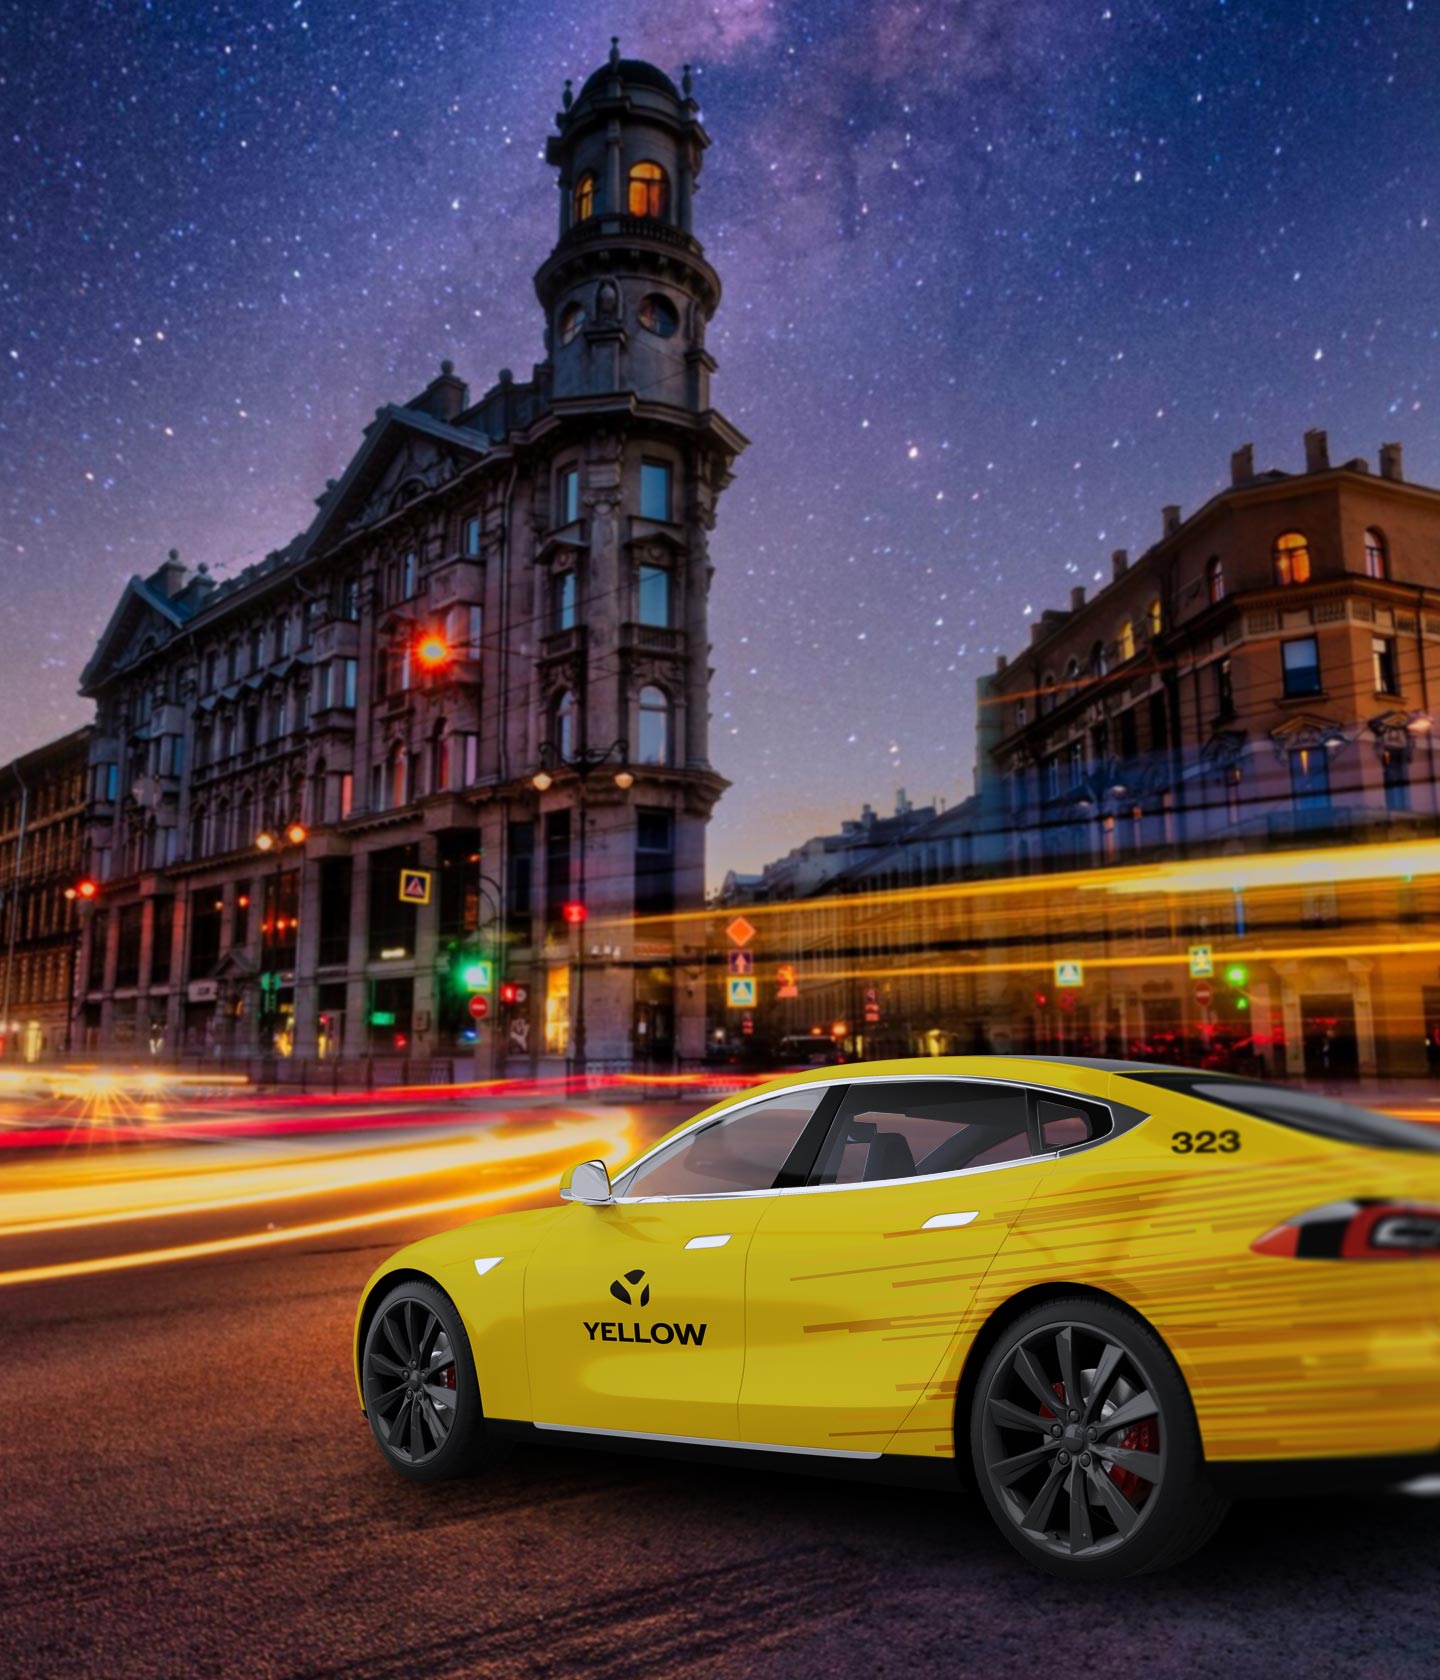 A composite image featuring a Tesla Model S with 